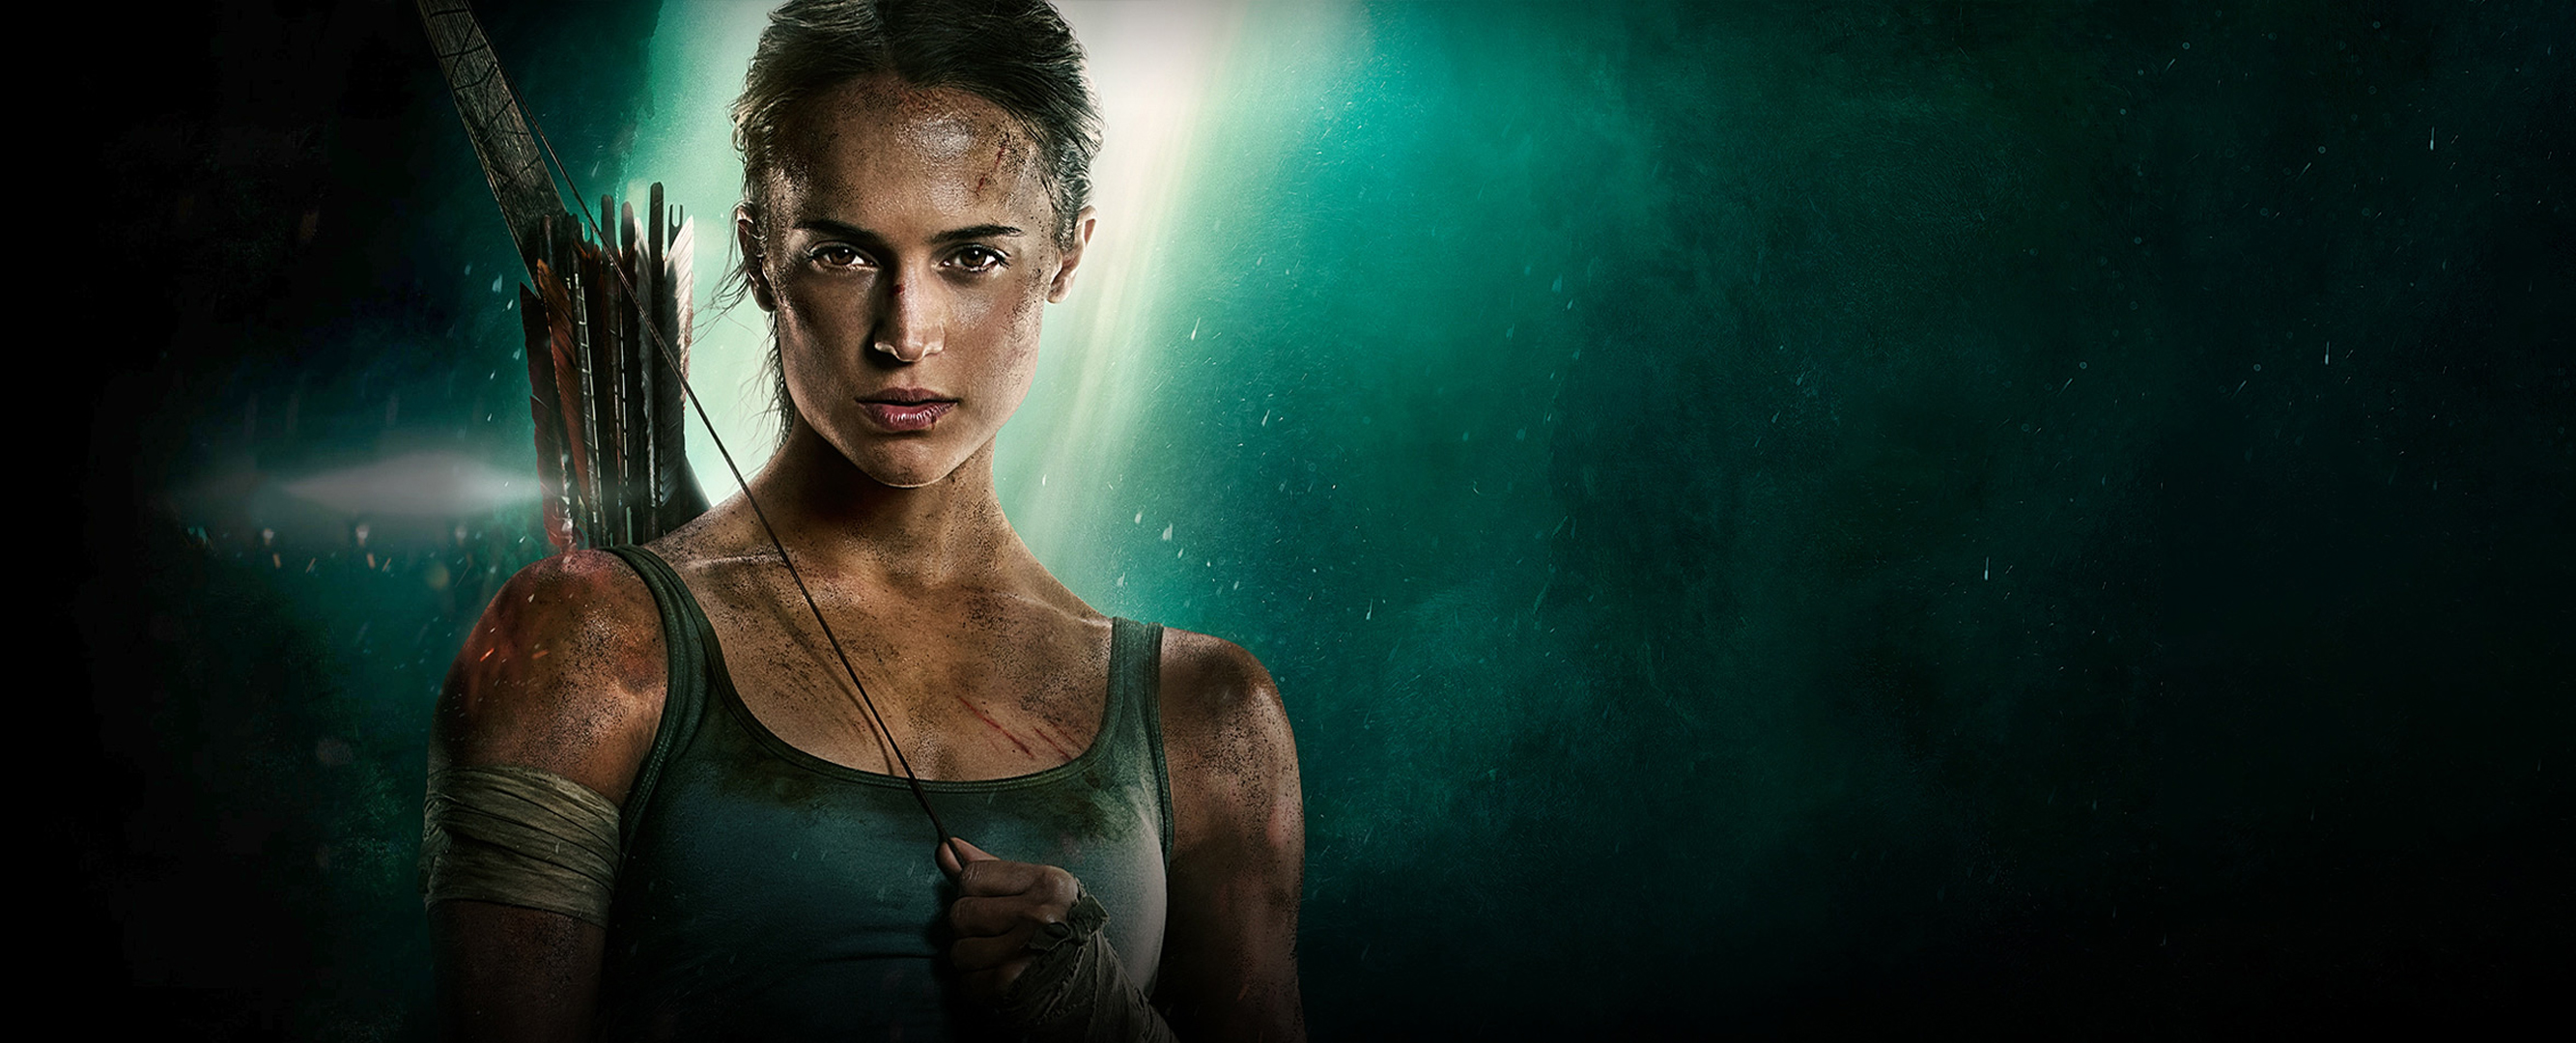 Tomb Raider 2018 Movie Alicia Vikander Poster, HD Movies, 4k Wallpapers, Images, Backgrounds 